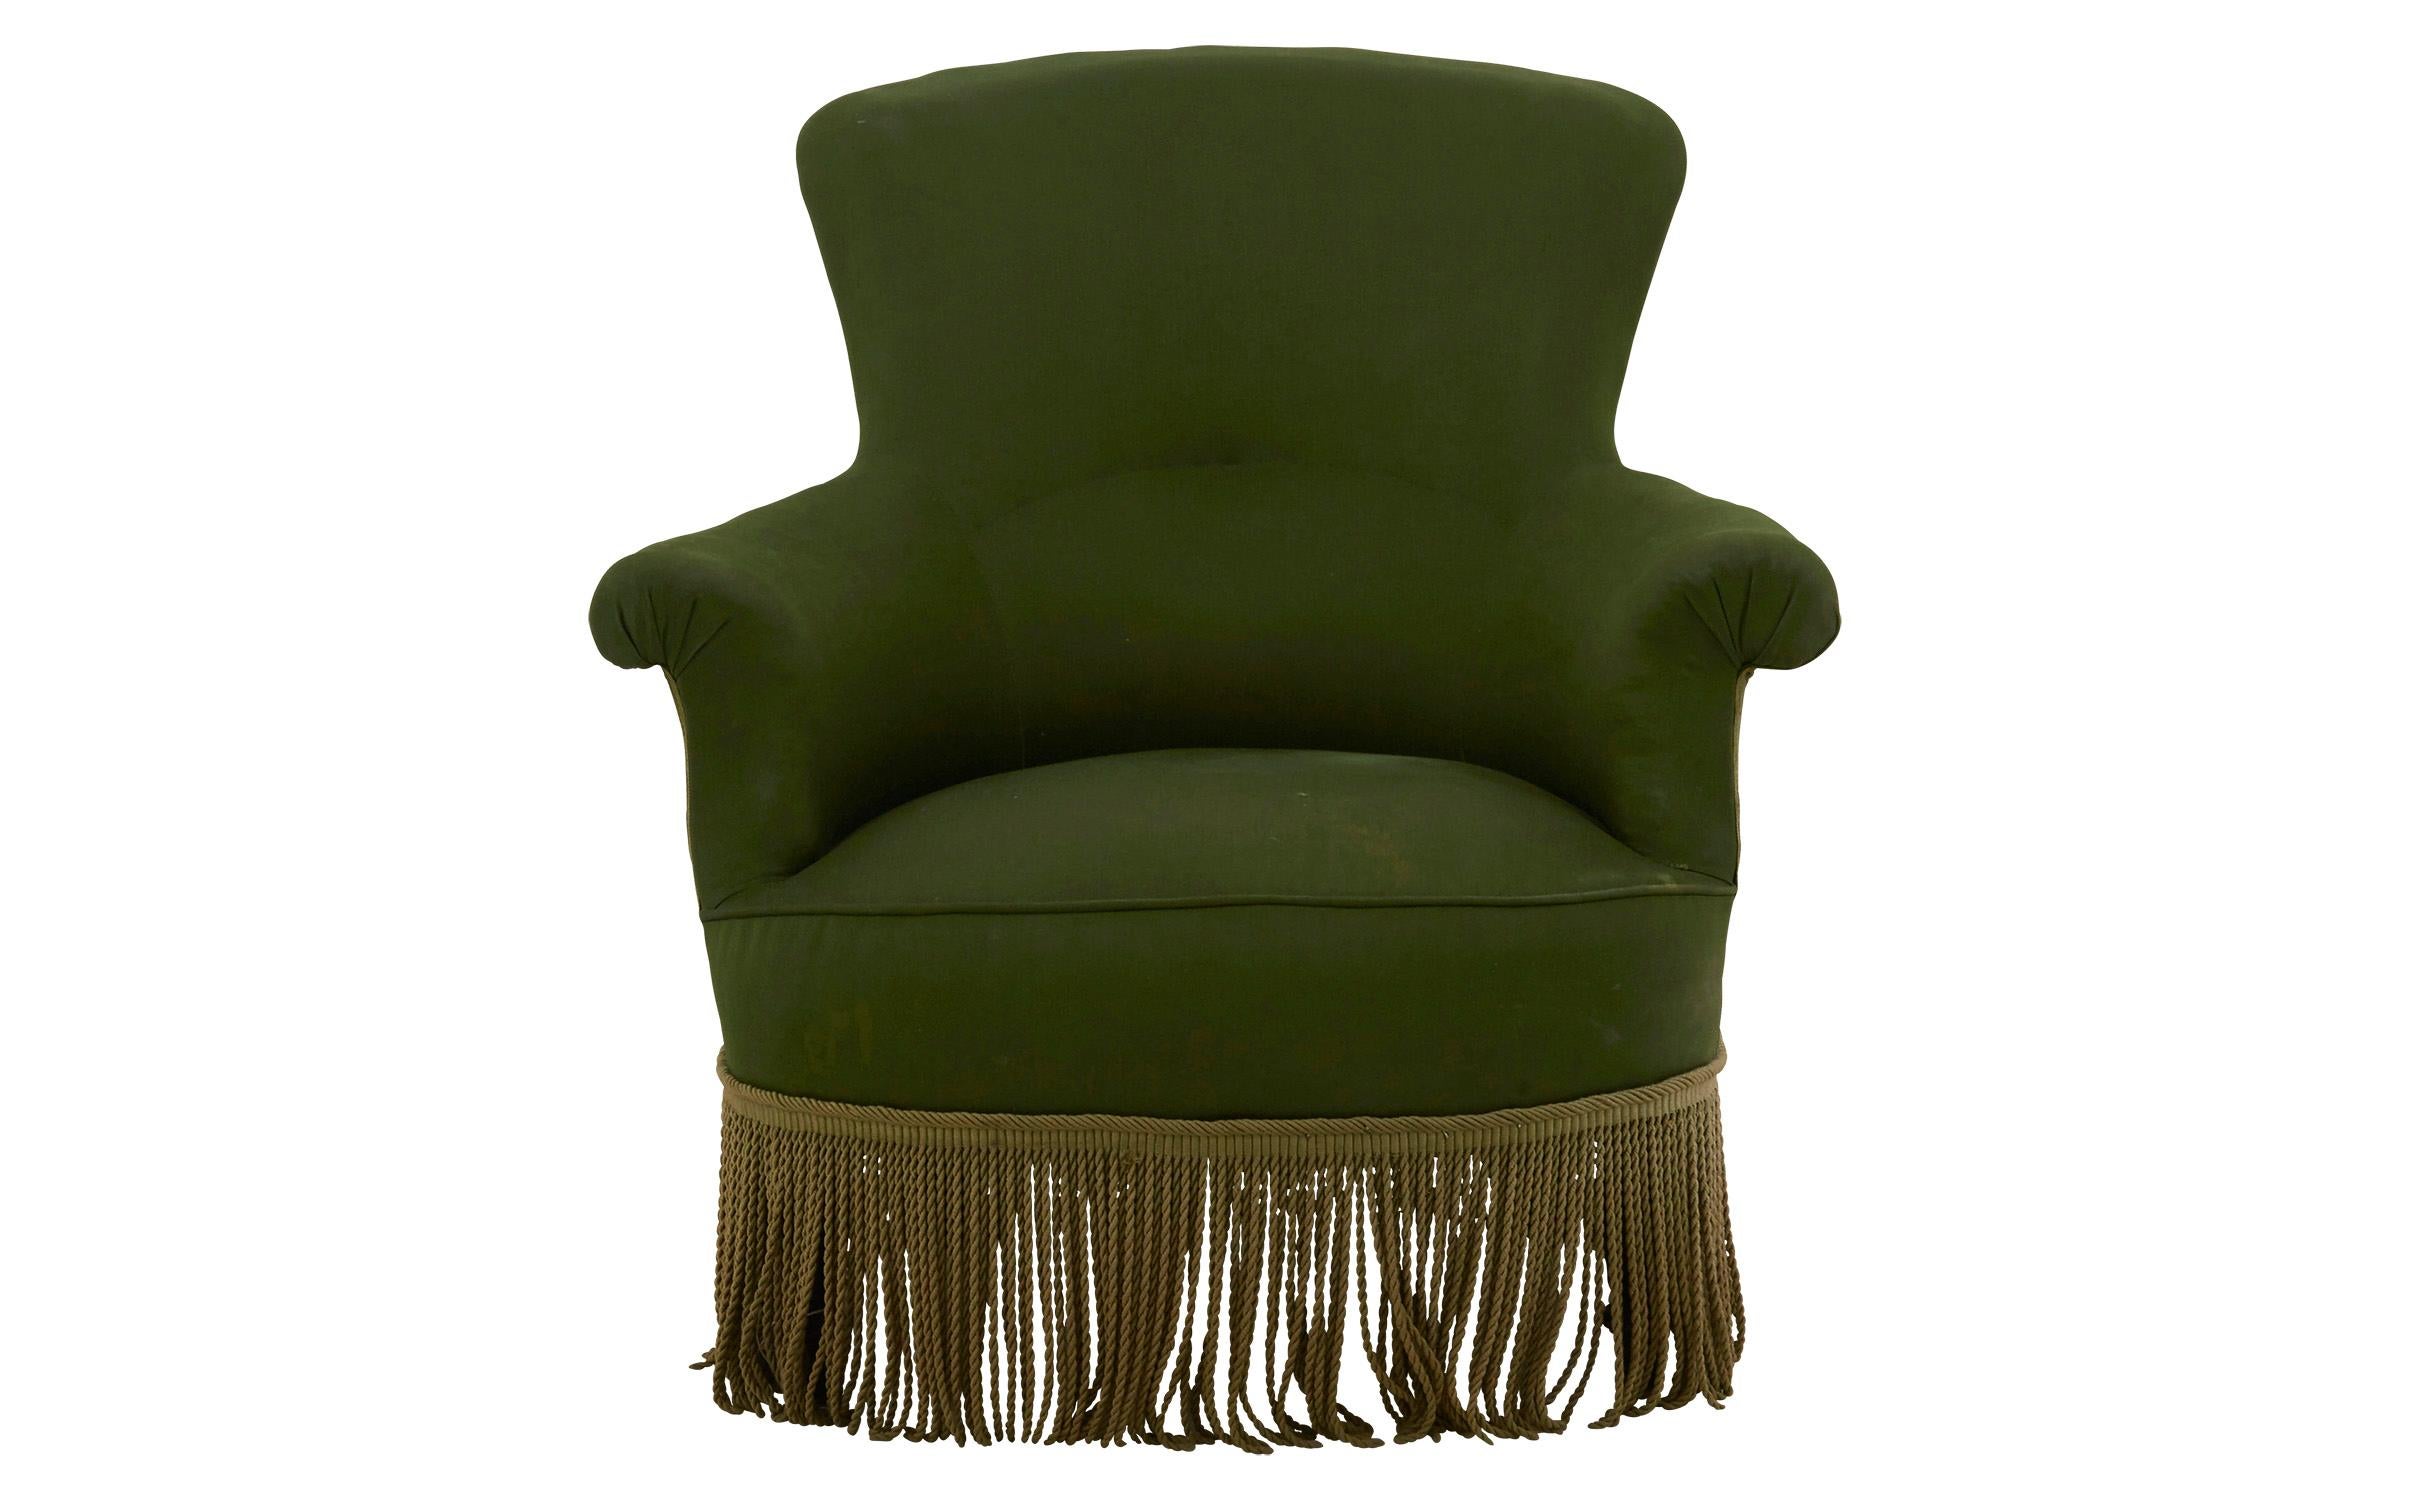 • Green upholstery and matching bullion fringe as found
• Late 19th century
• France

Dimensions:
• 30.5